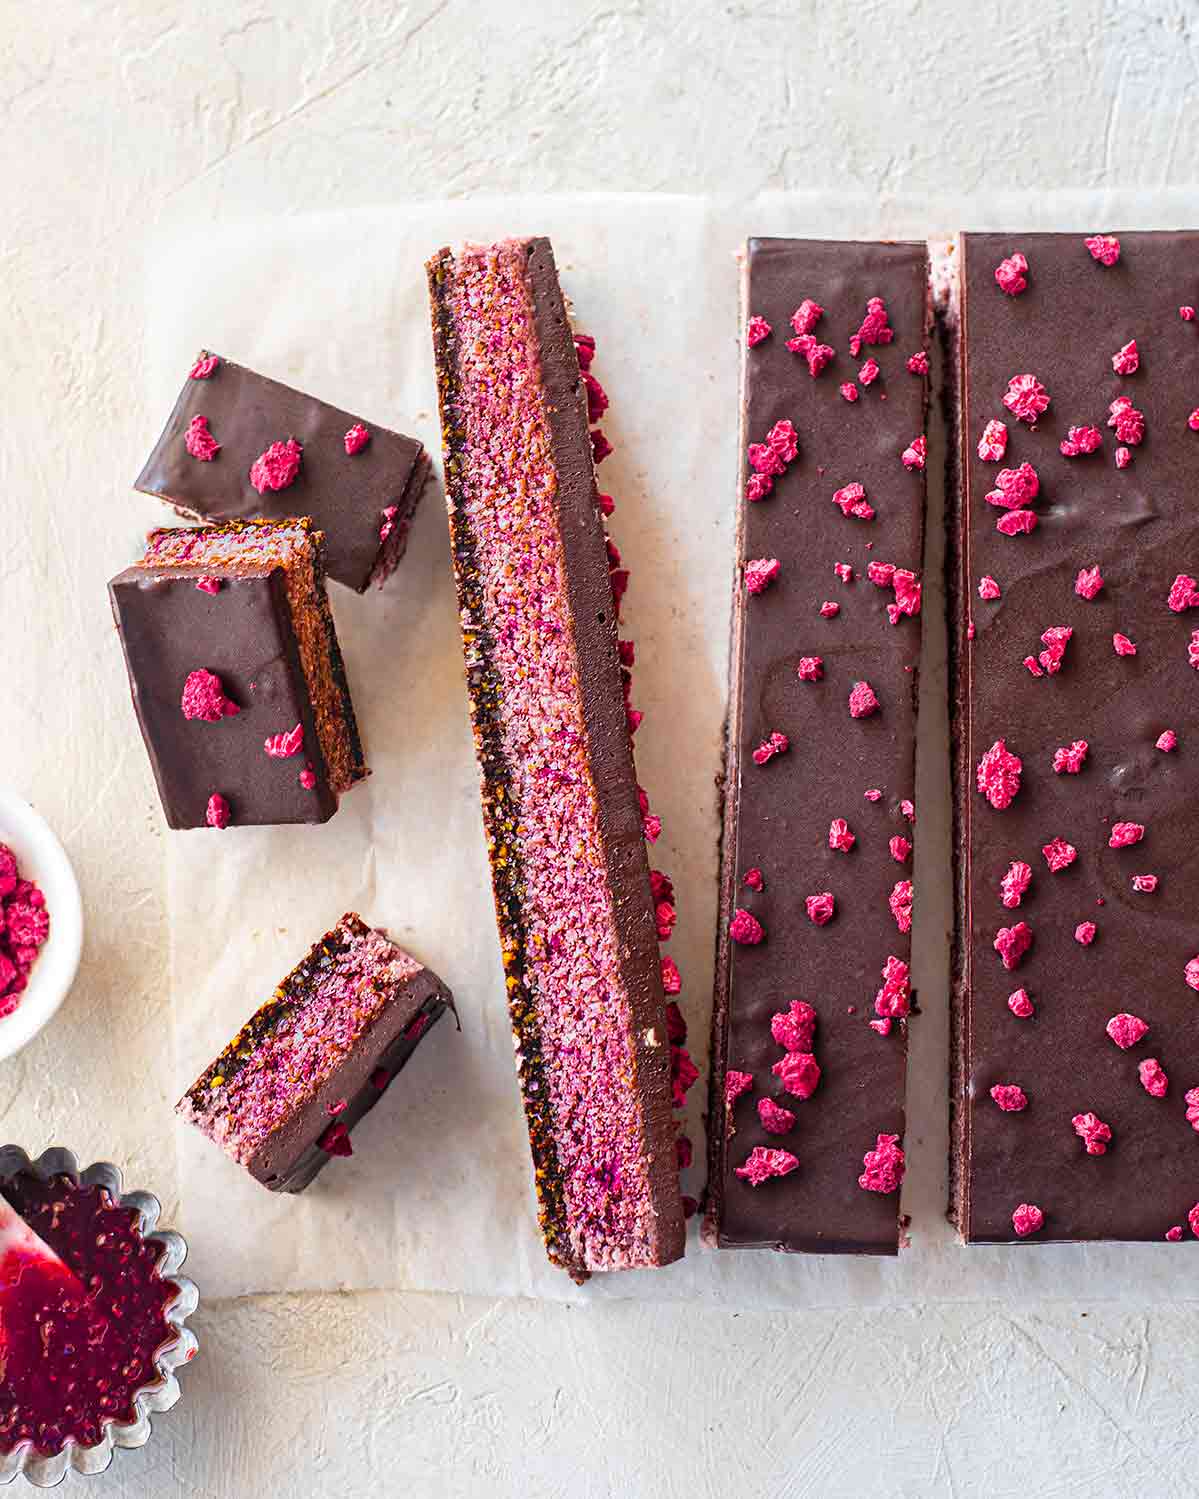 Long slabs showing the layers of the vegan raspberry bar.